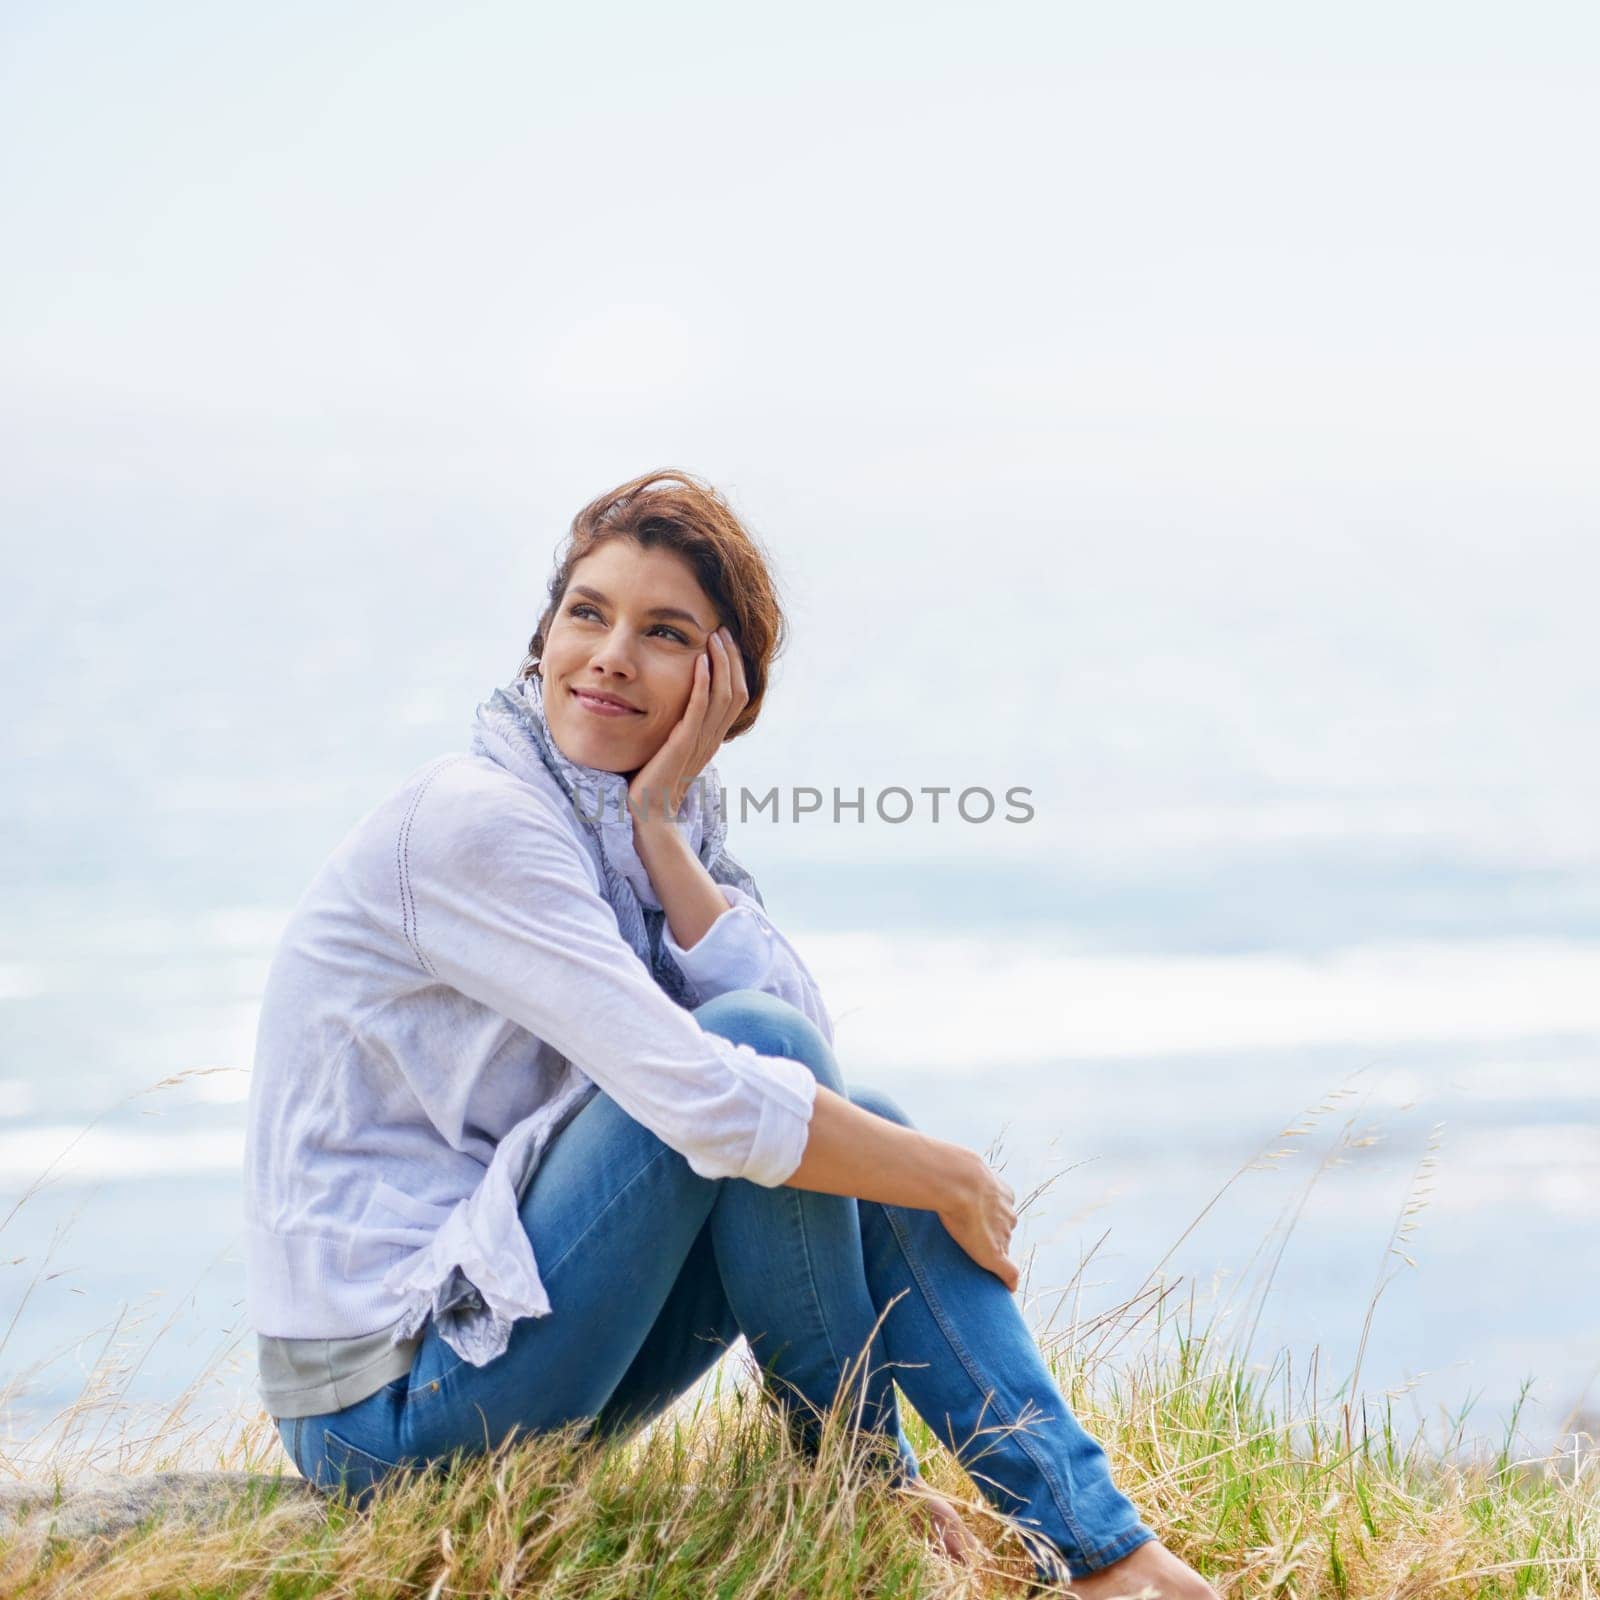 Woman, thinking and relax at beach in nature with happiness, gratitude and peace on holiday or vacation. Mindfulness, mock up and person on hill at the ocean or sea with ideas for future or travel.